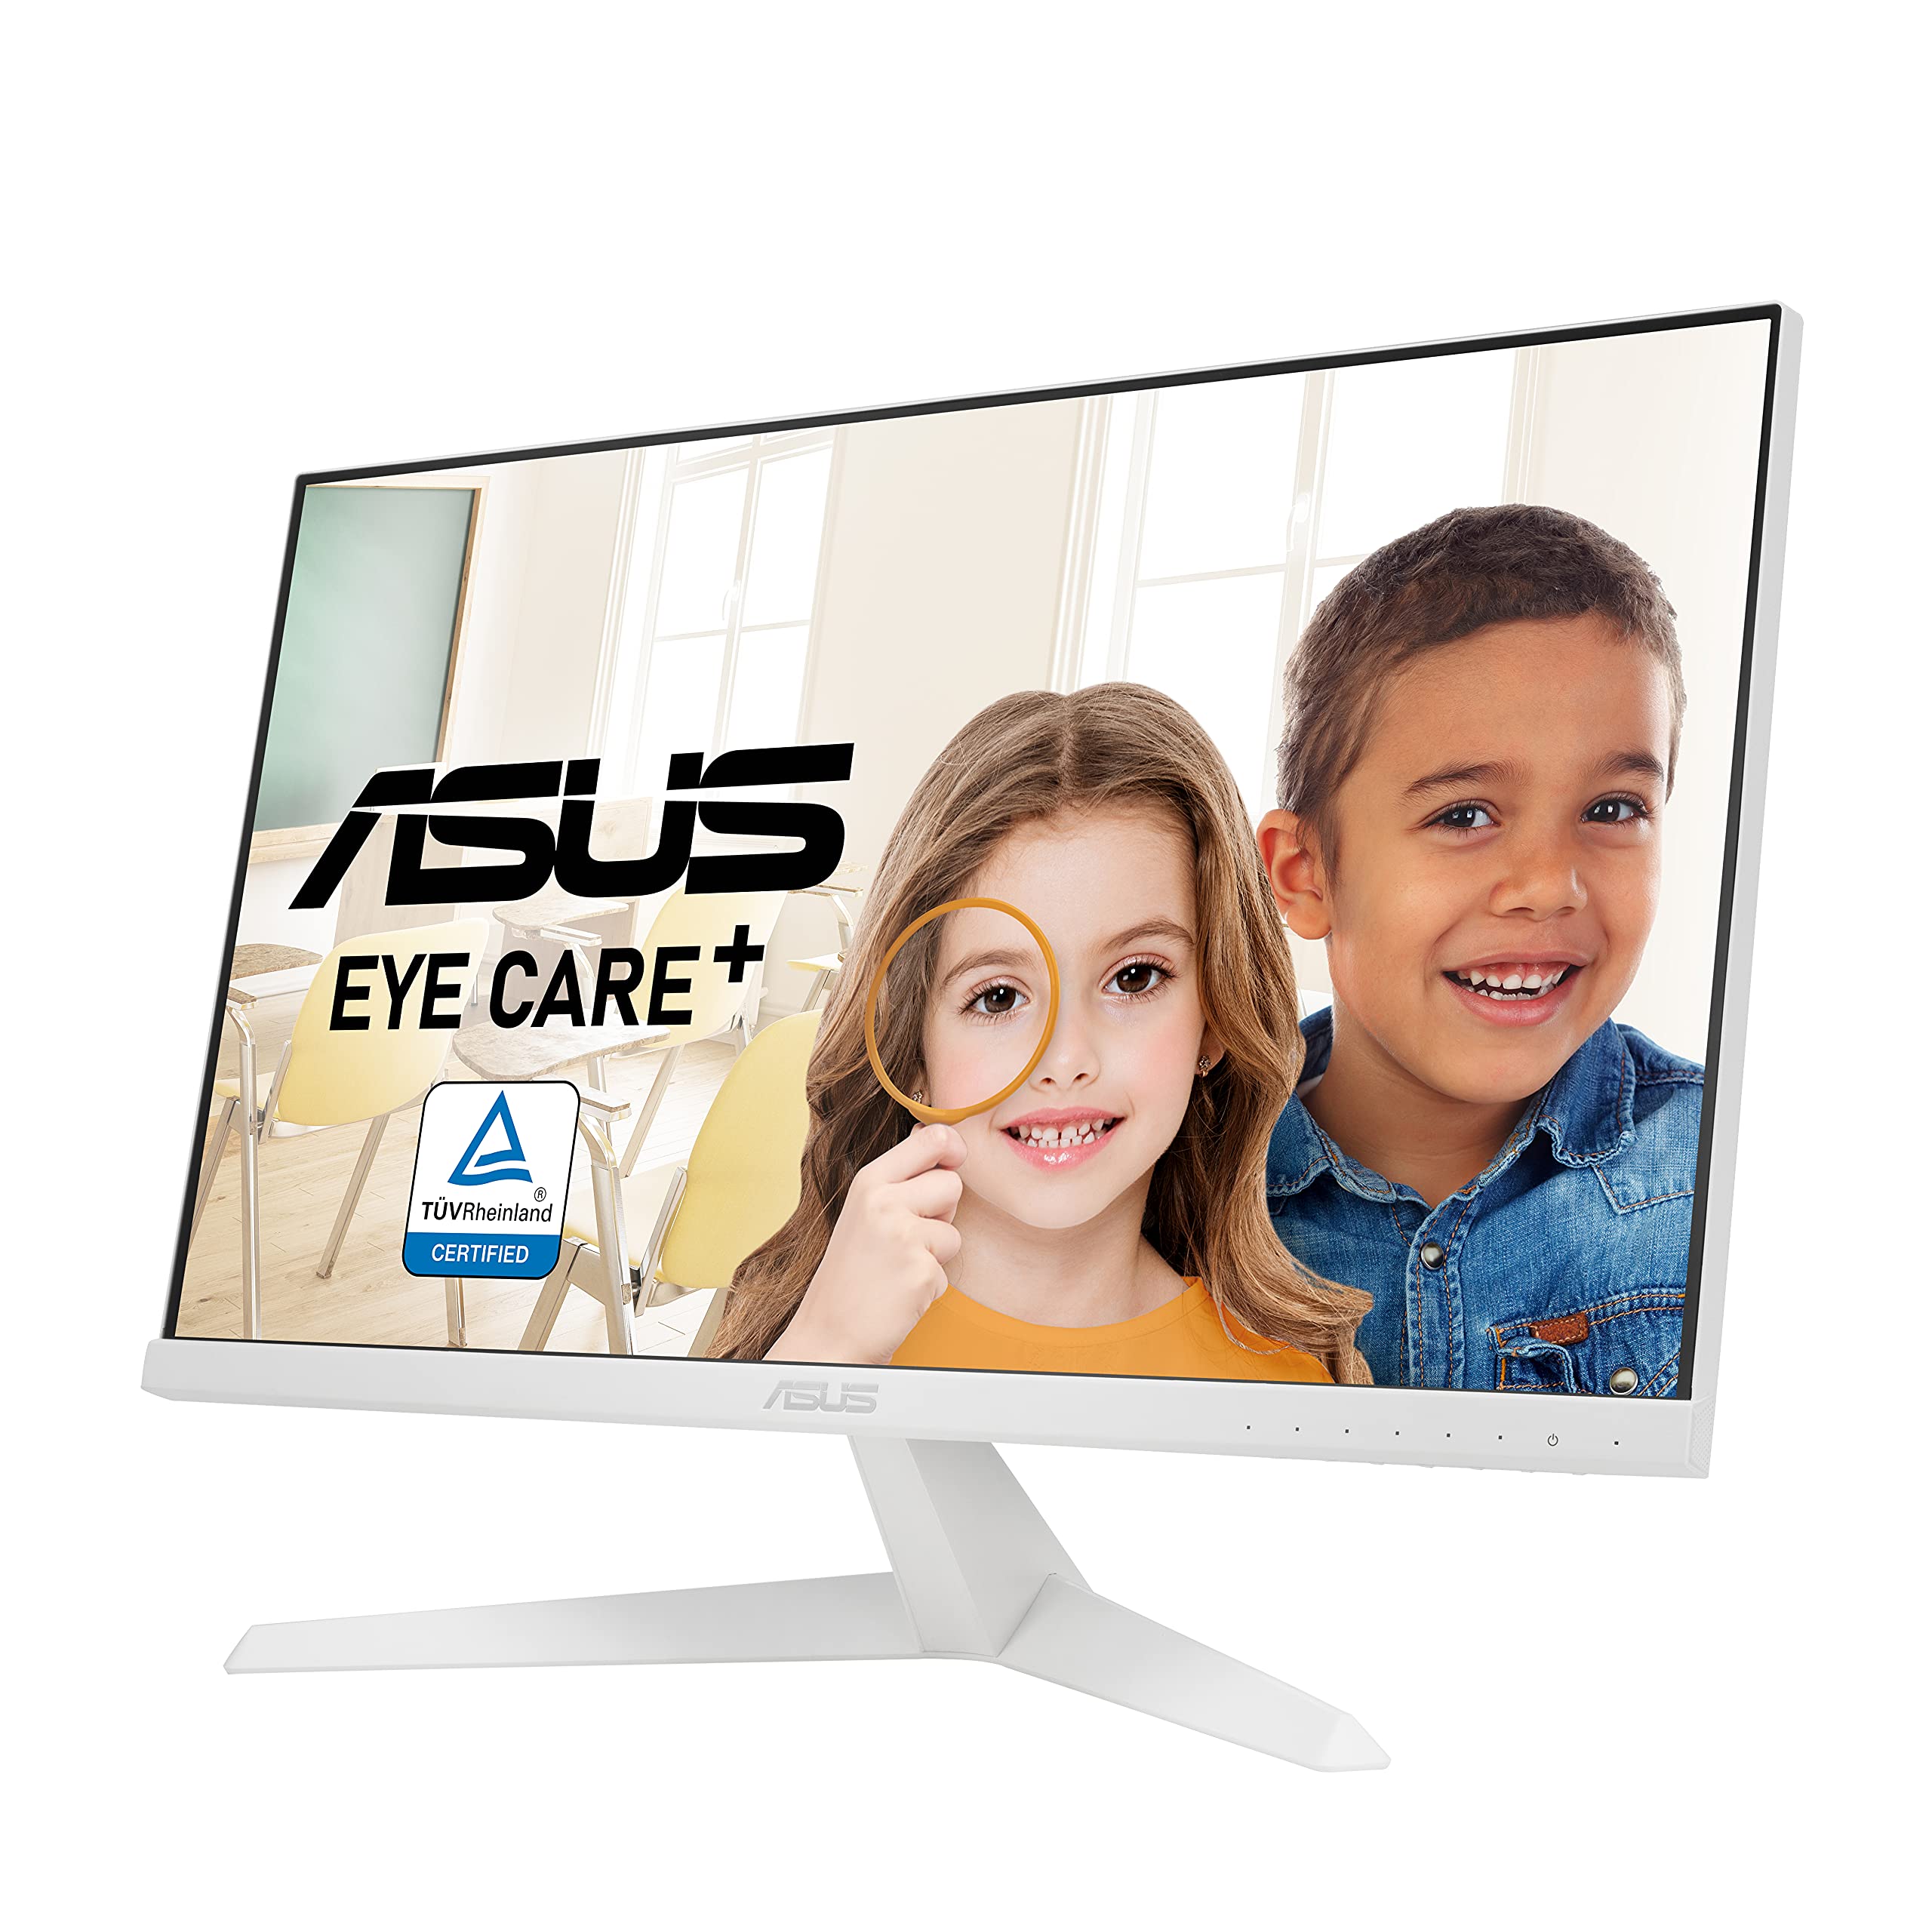 ASUS - VY249HE-W VY249HE-W 23.8 Full HD LED LCD Monitor - 16:9 - White - 24 Class - in-Plane Switching (IPS) Technology - 1920 x 1080-16.7 Million Colors - FreeSync - 250 Nit - 1 ms - HDMI -